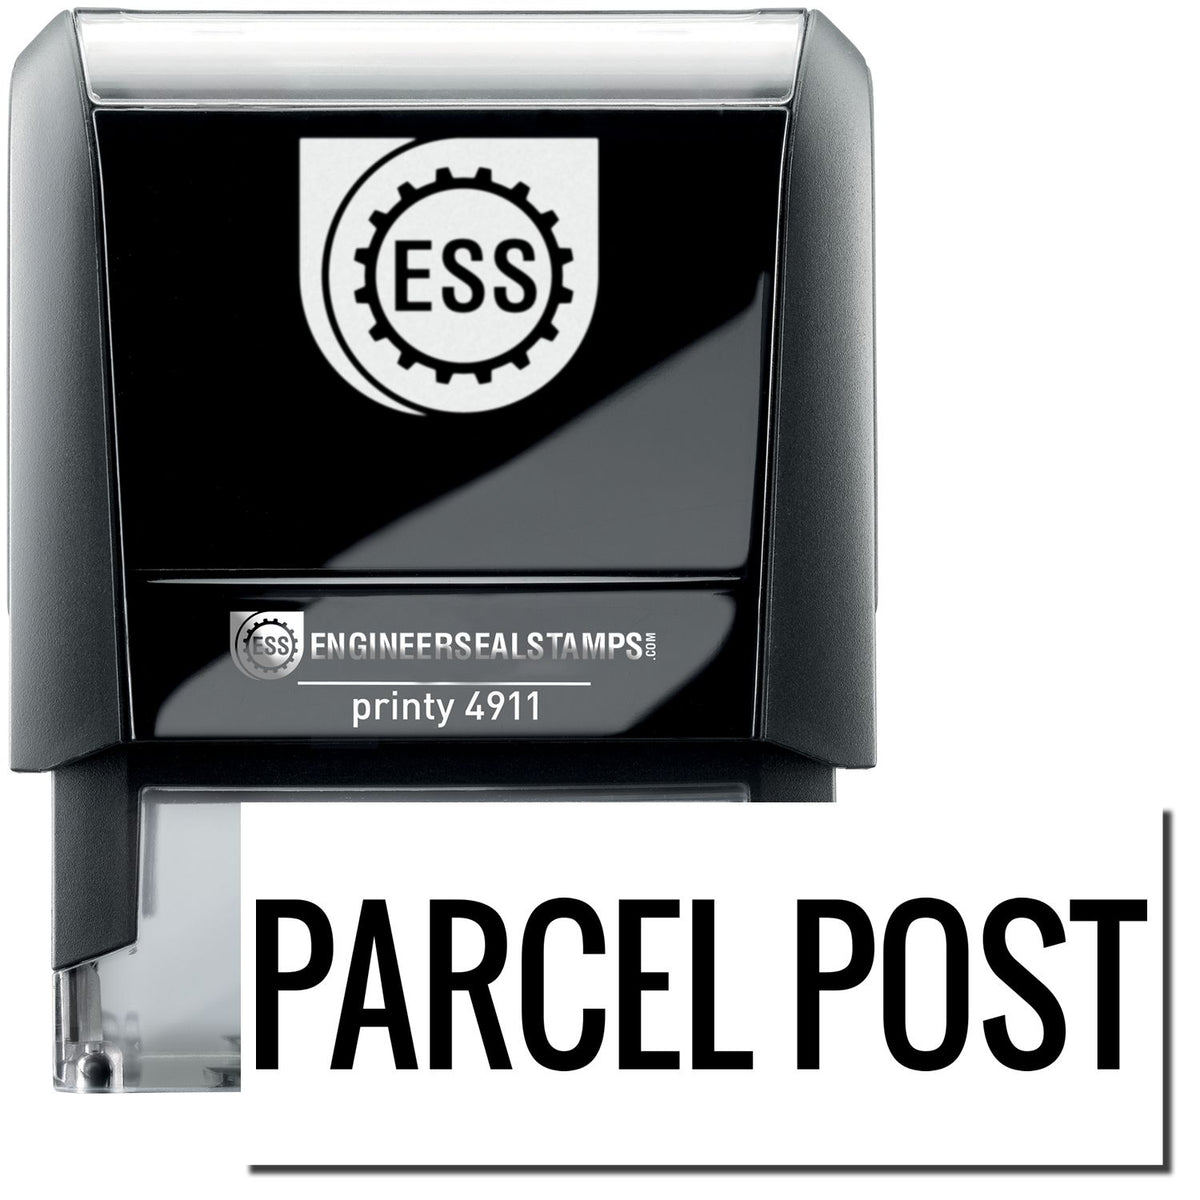 A self-inking stamp with a stamped image showing how the text &quot;PARCEL POST&quot; is displayed after stamping.